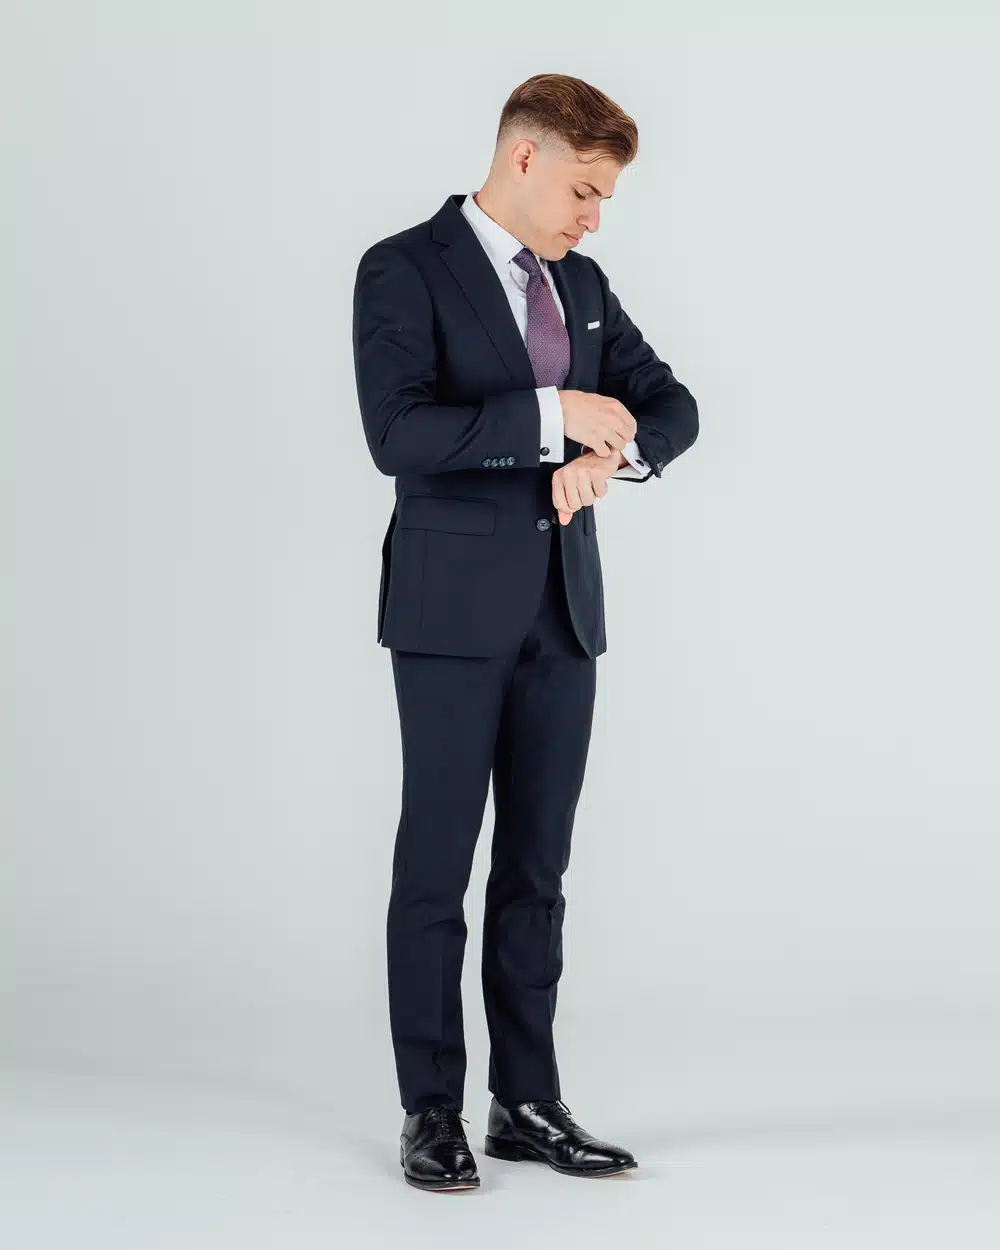 Perfectly Suited by Garth Mattarazi Suit